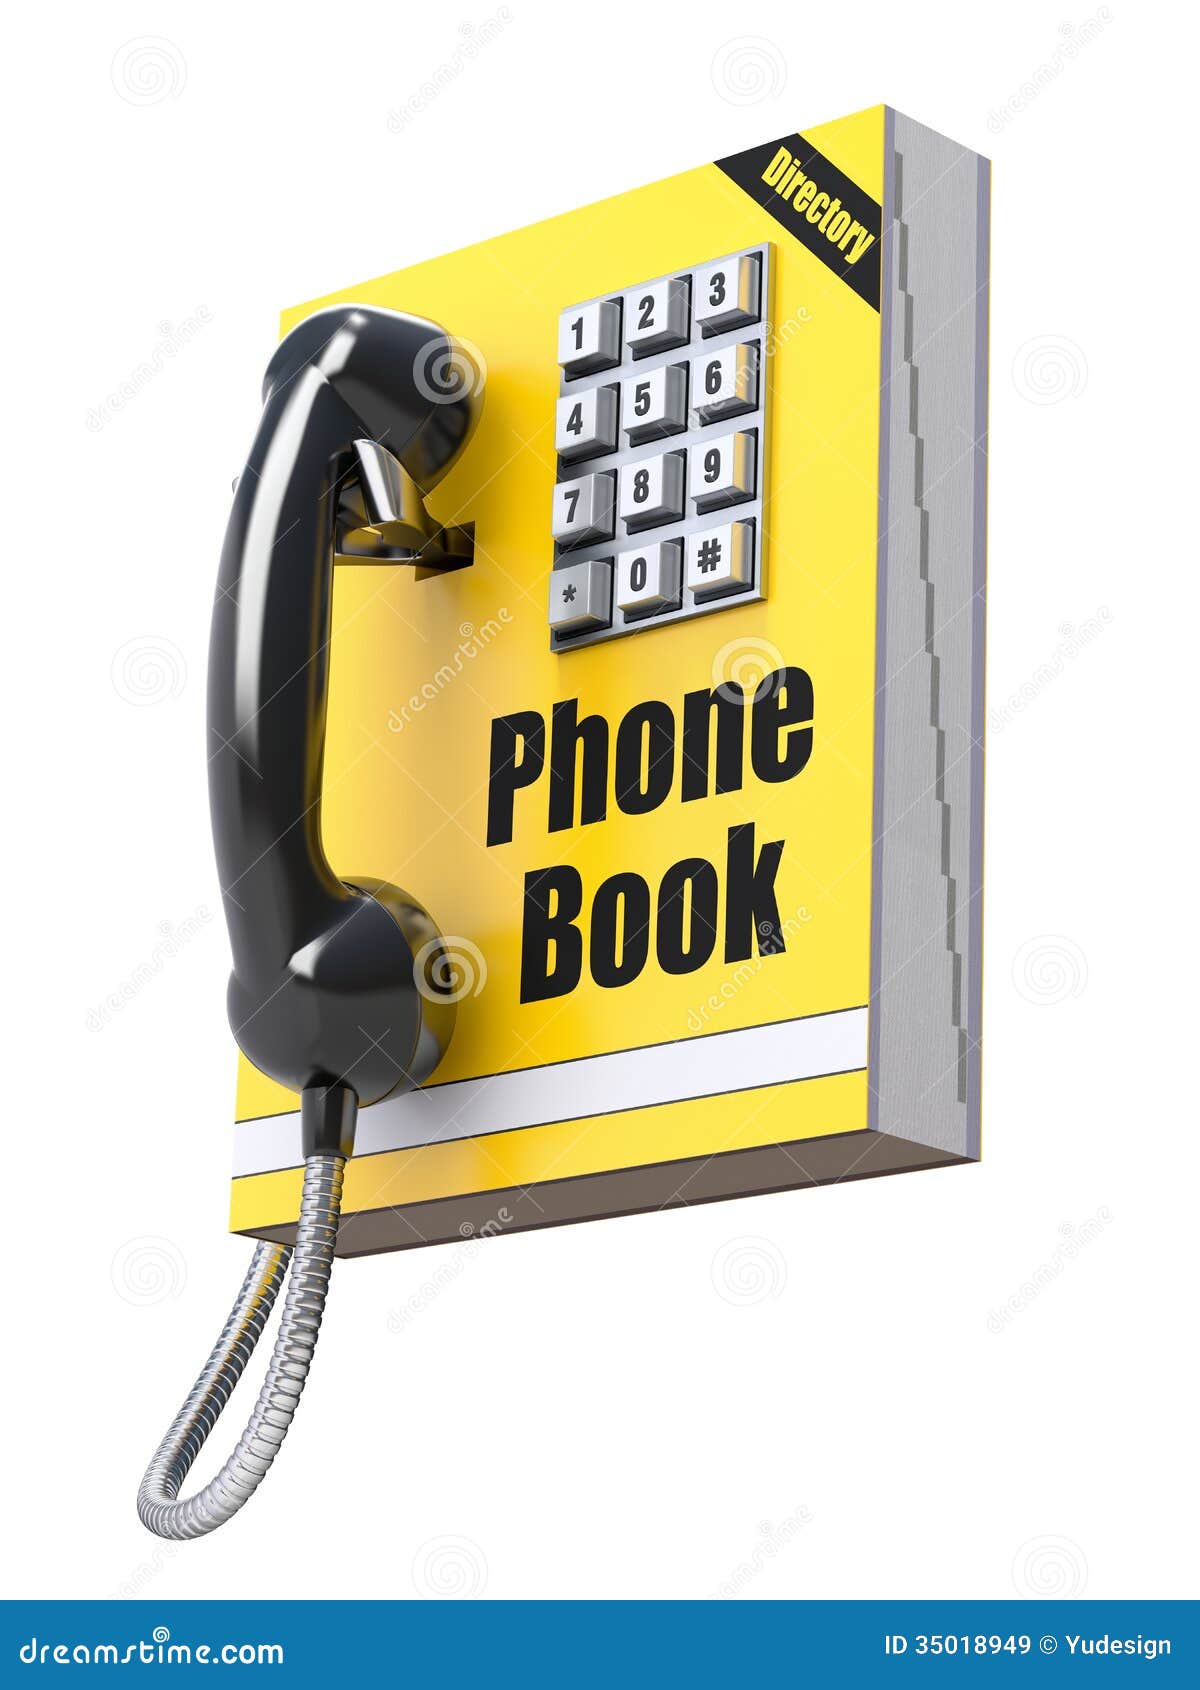 phone directory clipart - photo #30